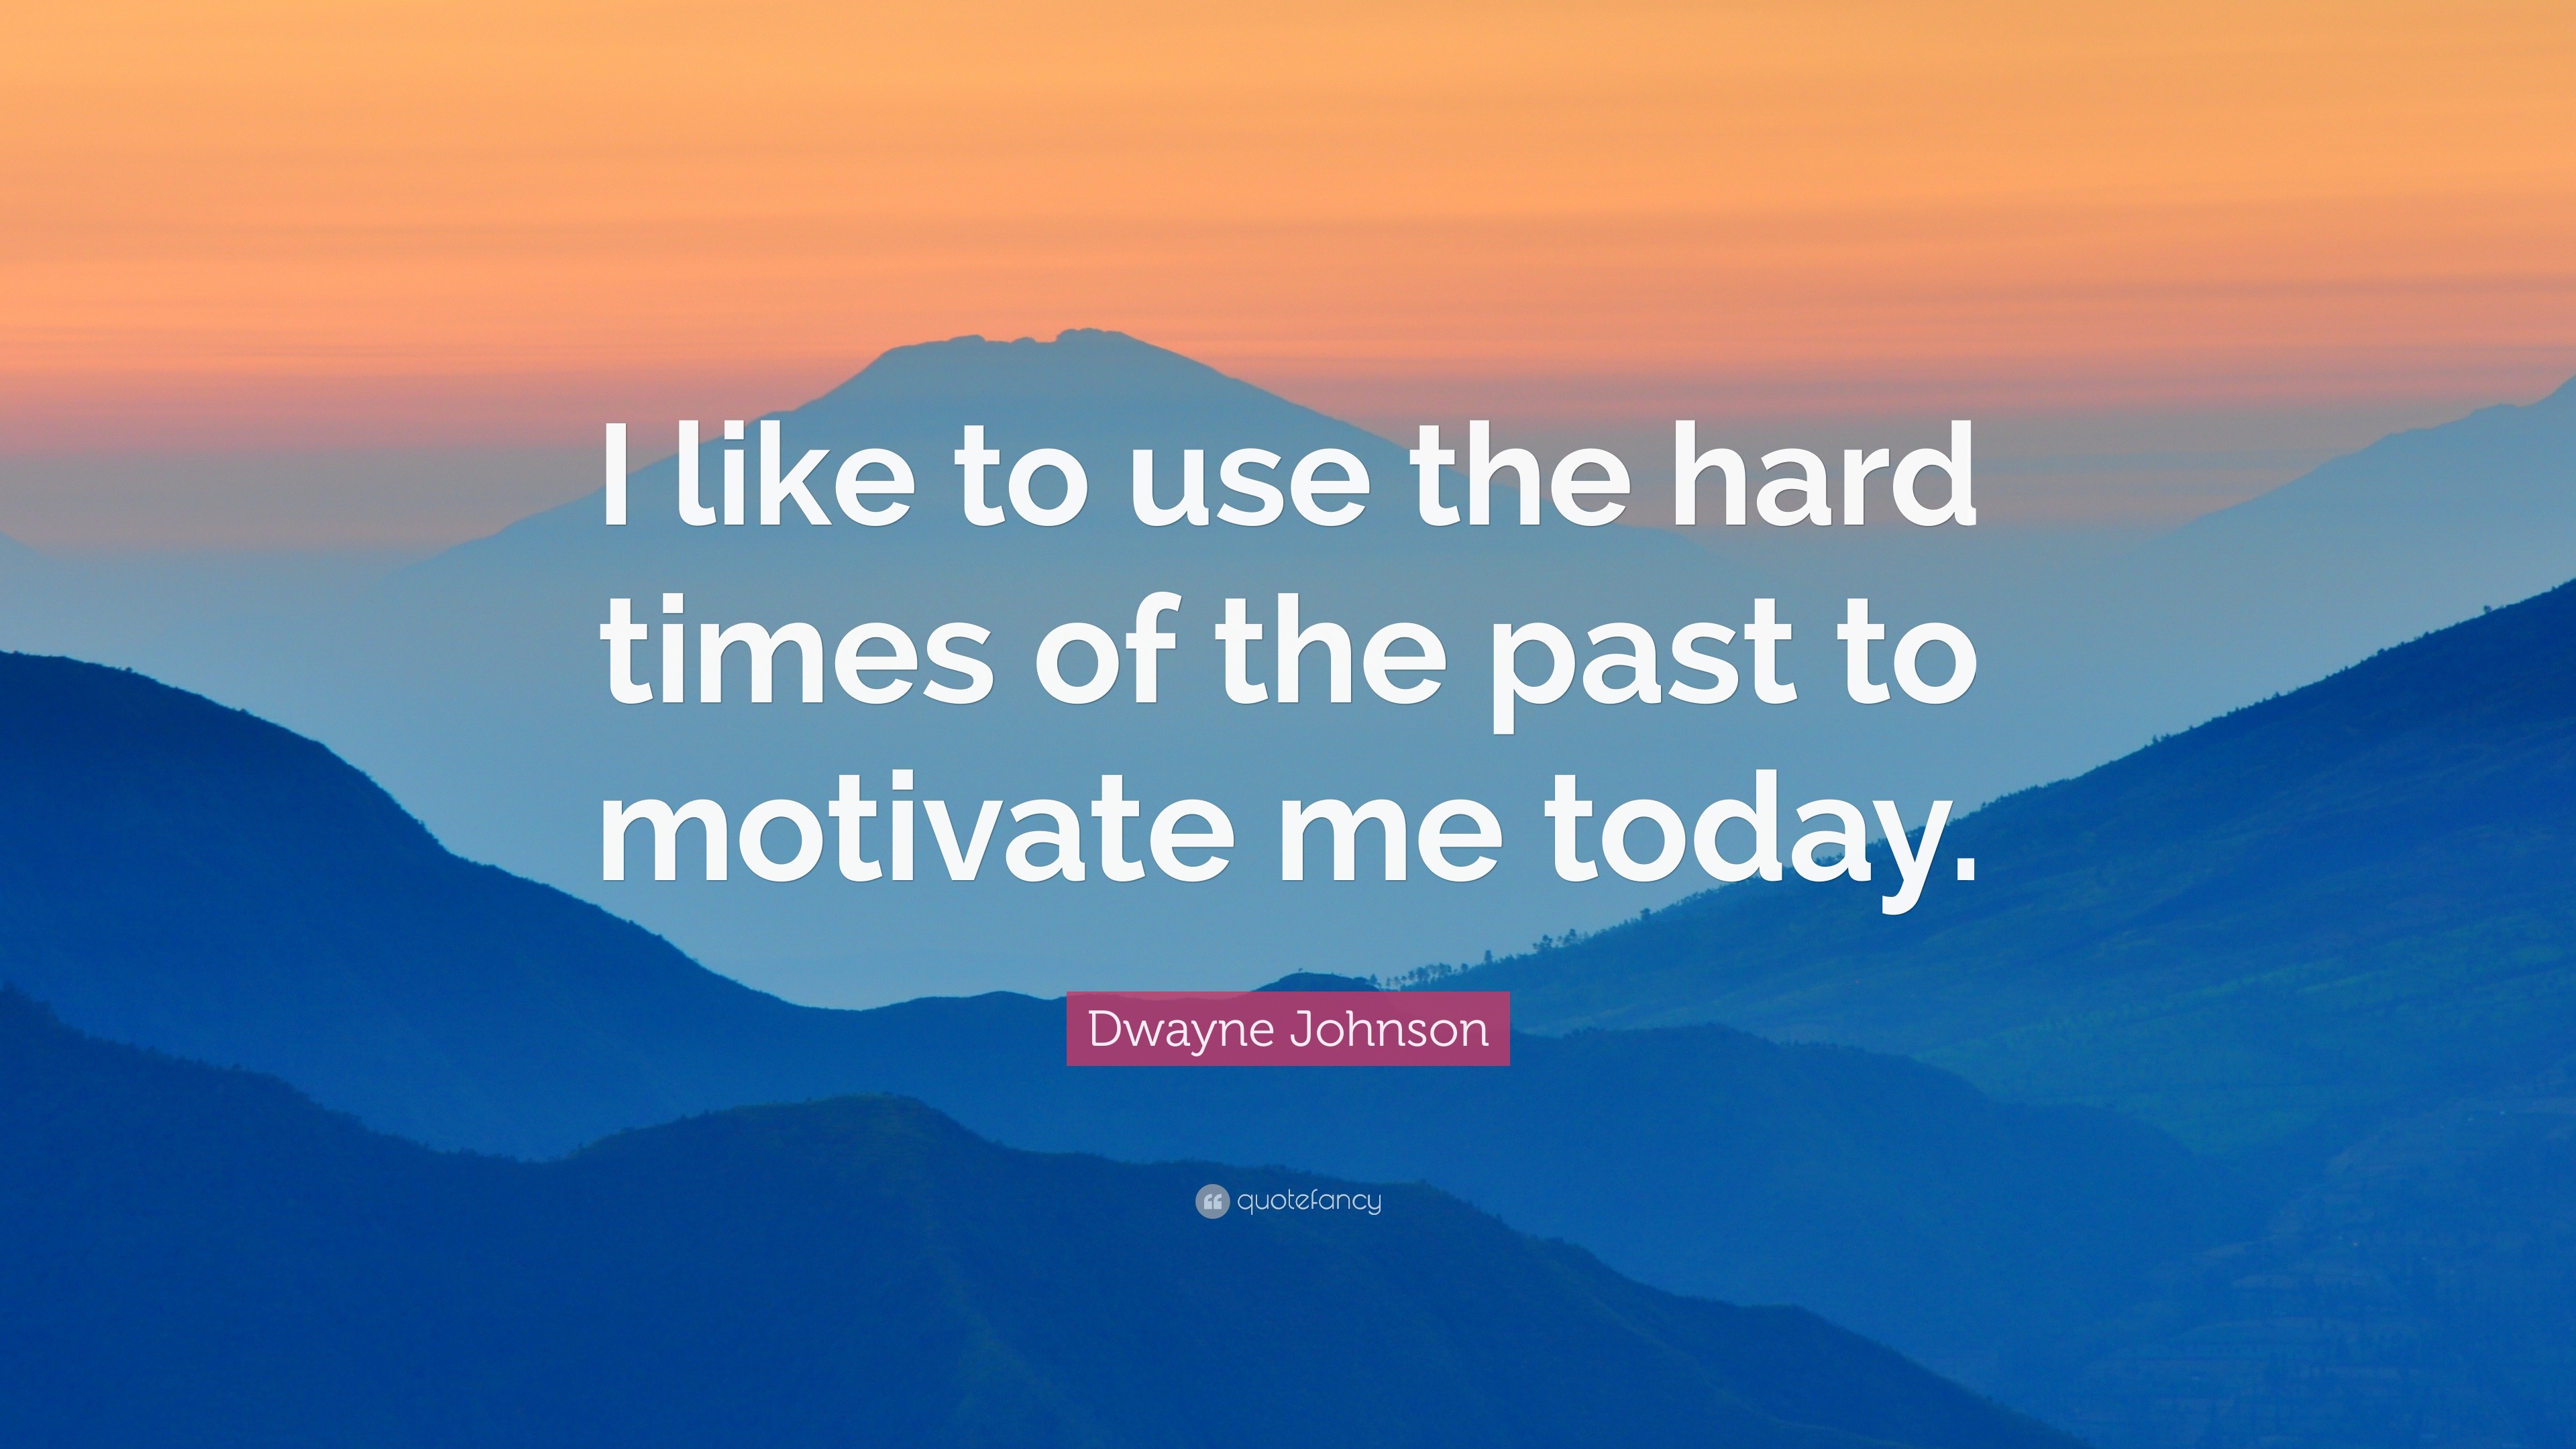 Dwayne Johnson Quote: “I like to use the hard times of the past to motivate  me